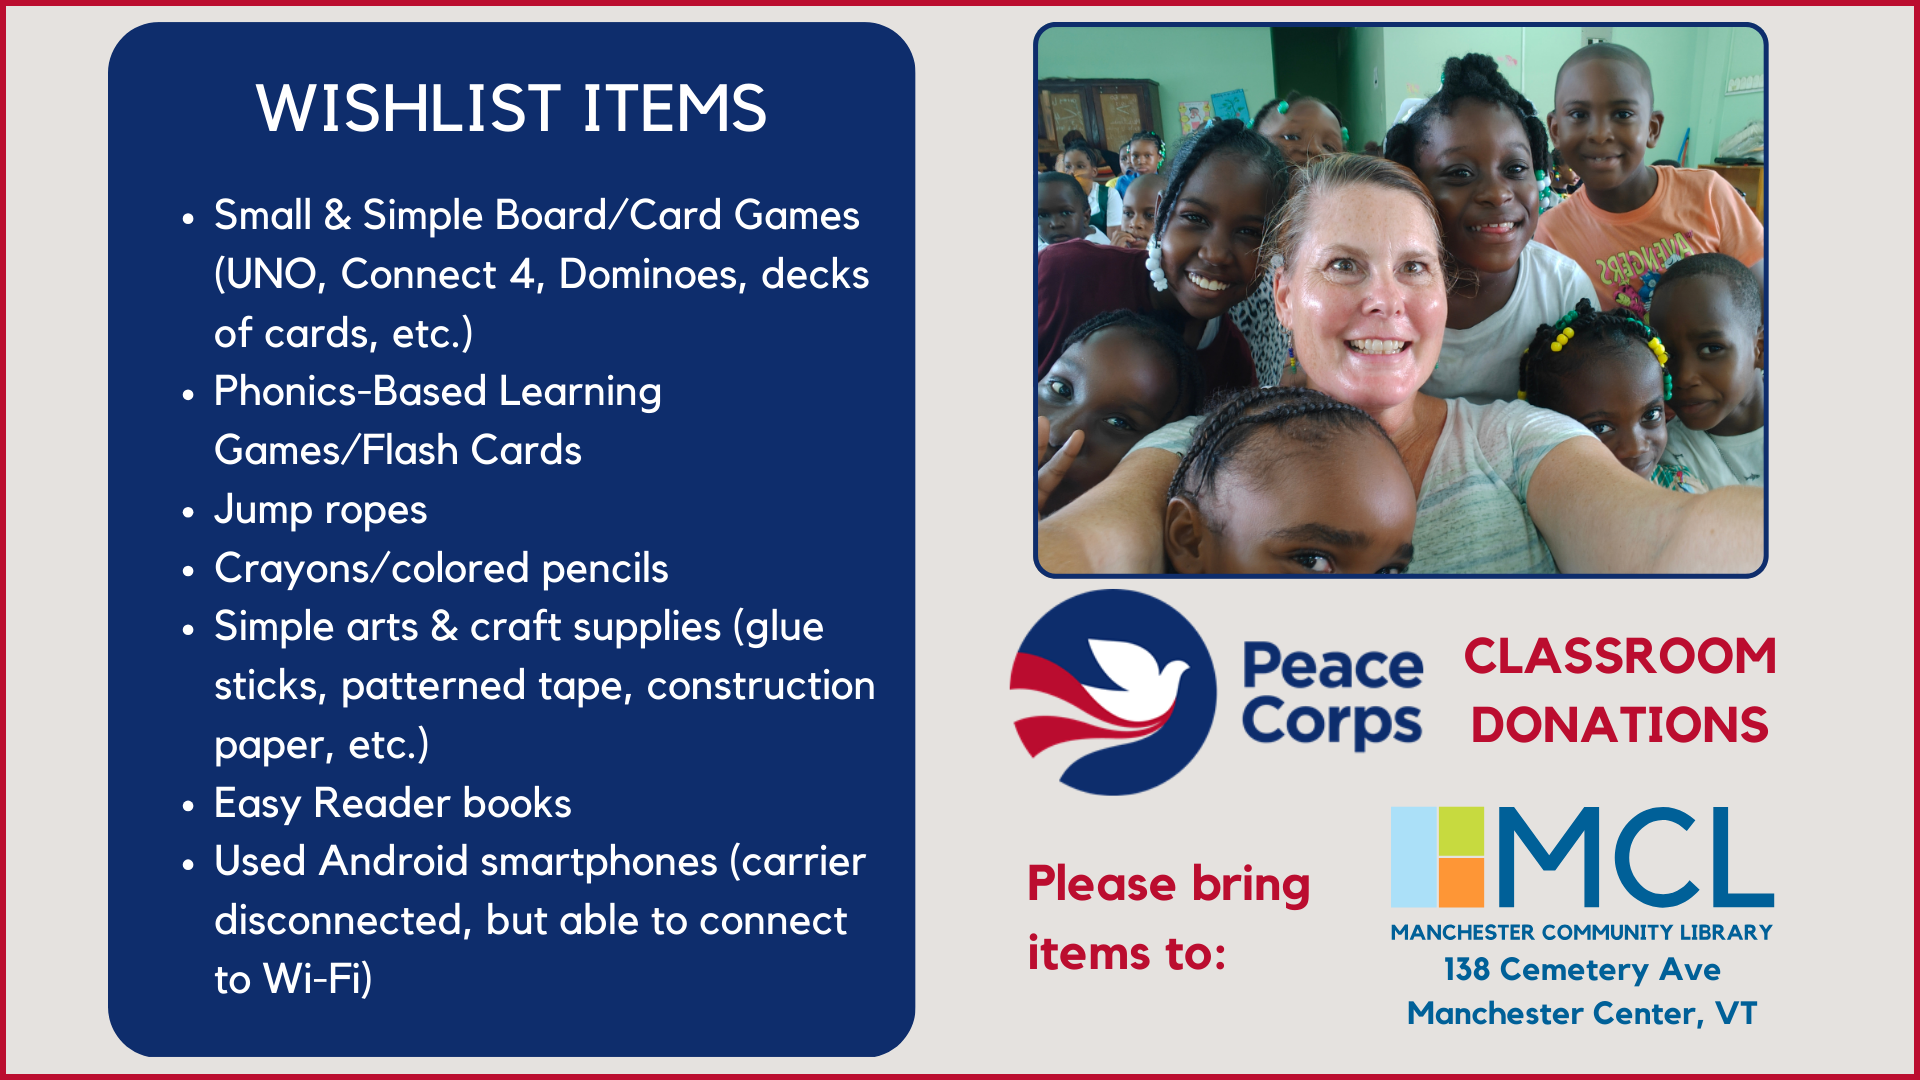 Donation Collection for Peace Corps Classroom